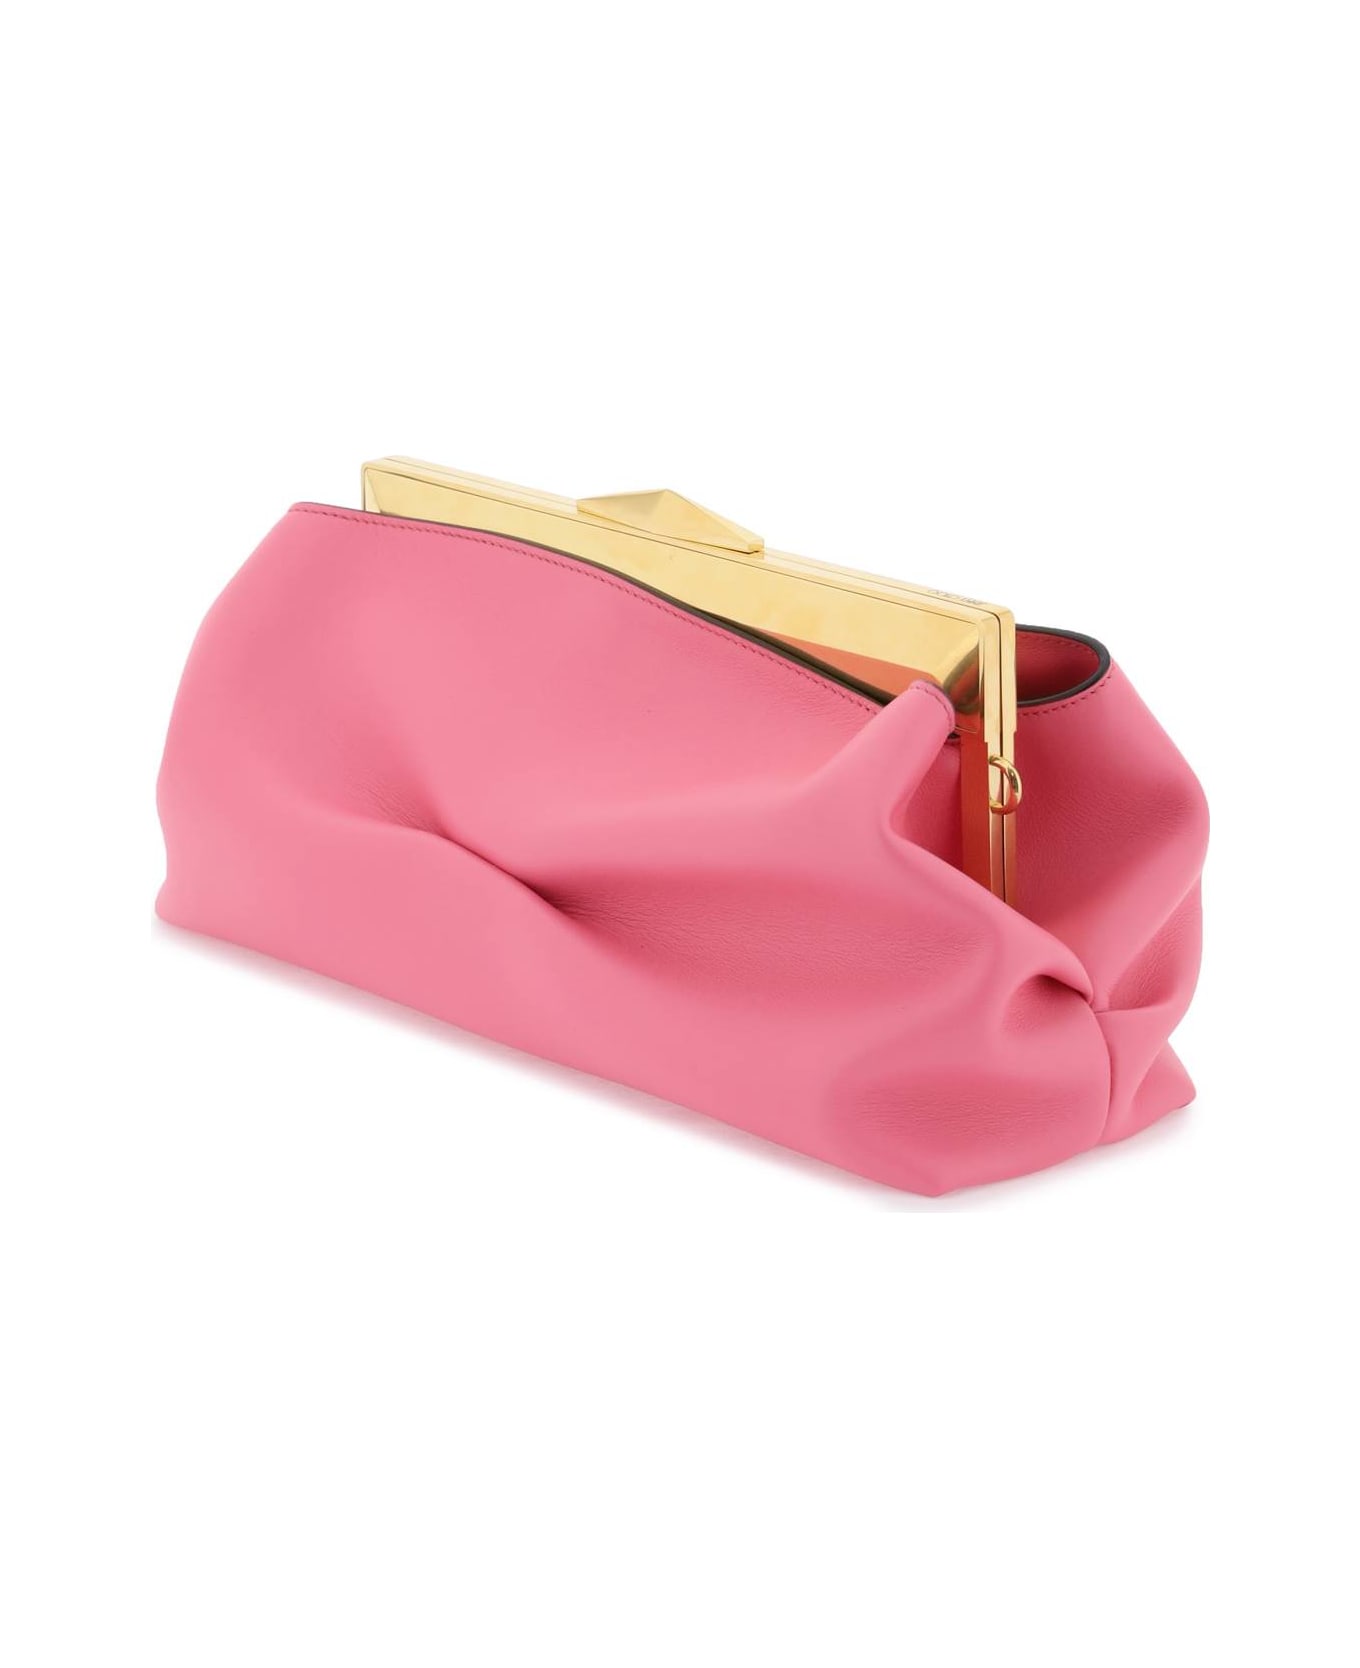 Jimmy Choo Leather Diamond Frame Clutch - CANDY PINK GOLD (Pink)